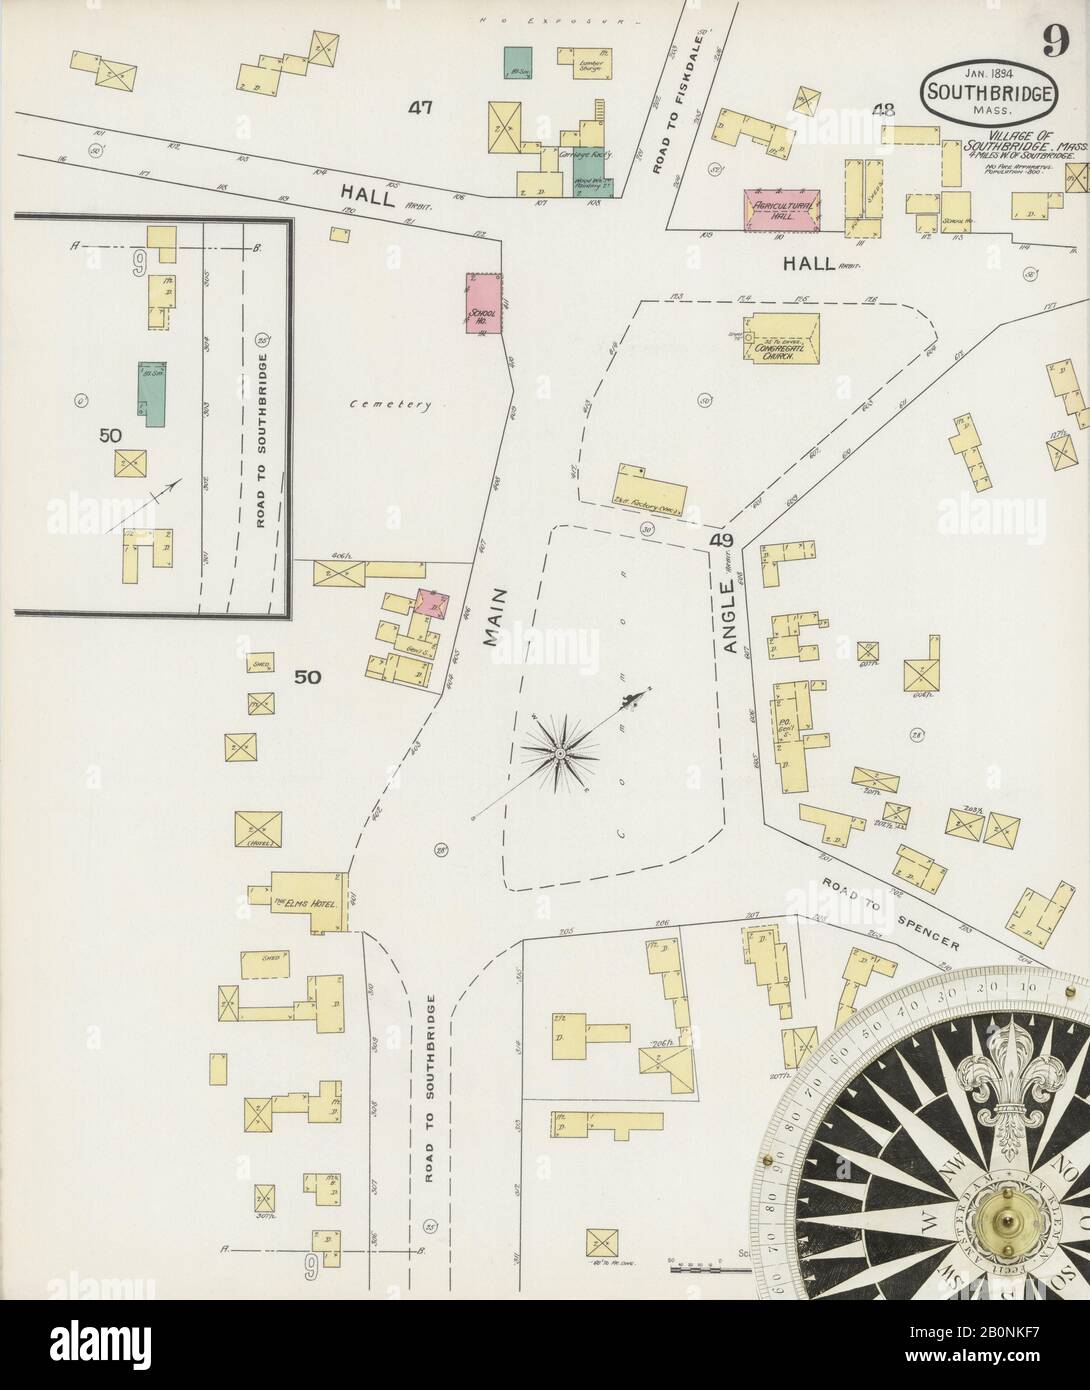 Image 9 of Sanborn Fire Insurance Map from Southbridge, Worcester County, Massachusetts. Jan 1894. 10 Sheet(s). Includes Globe Village, Sturbridge, Fiskdale, America, street map with a Nineteenth Century compass Stock Photo